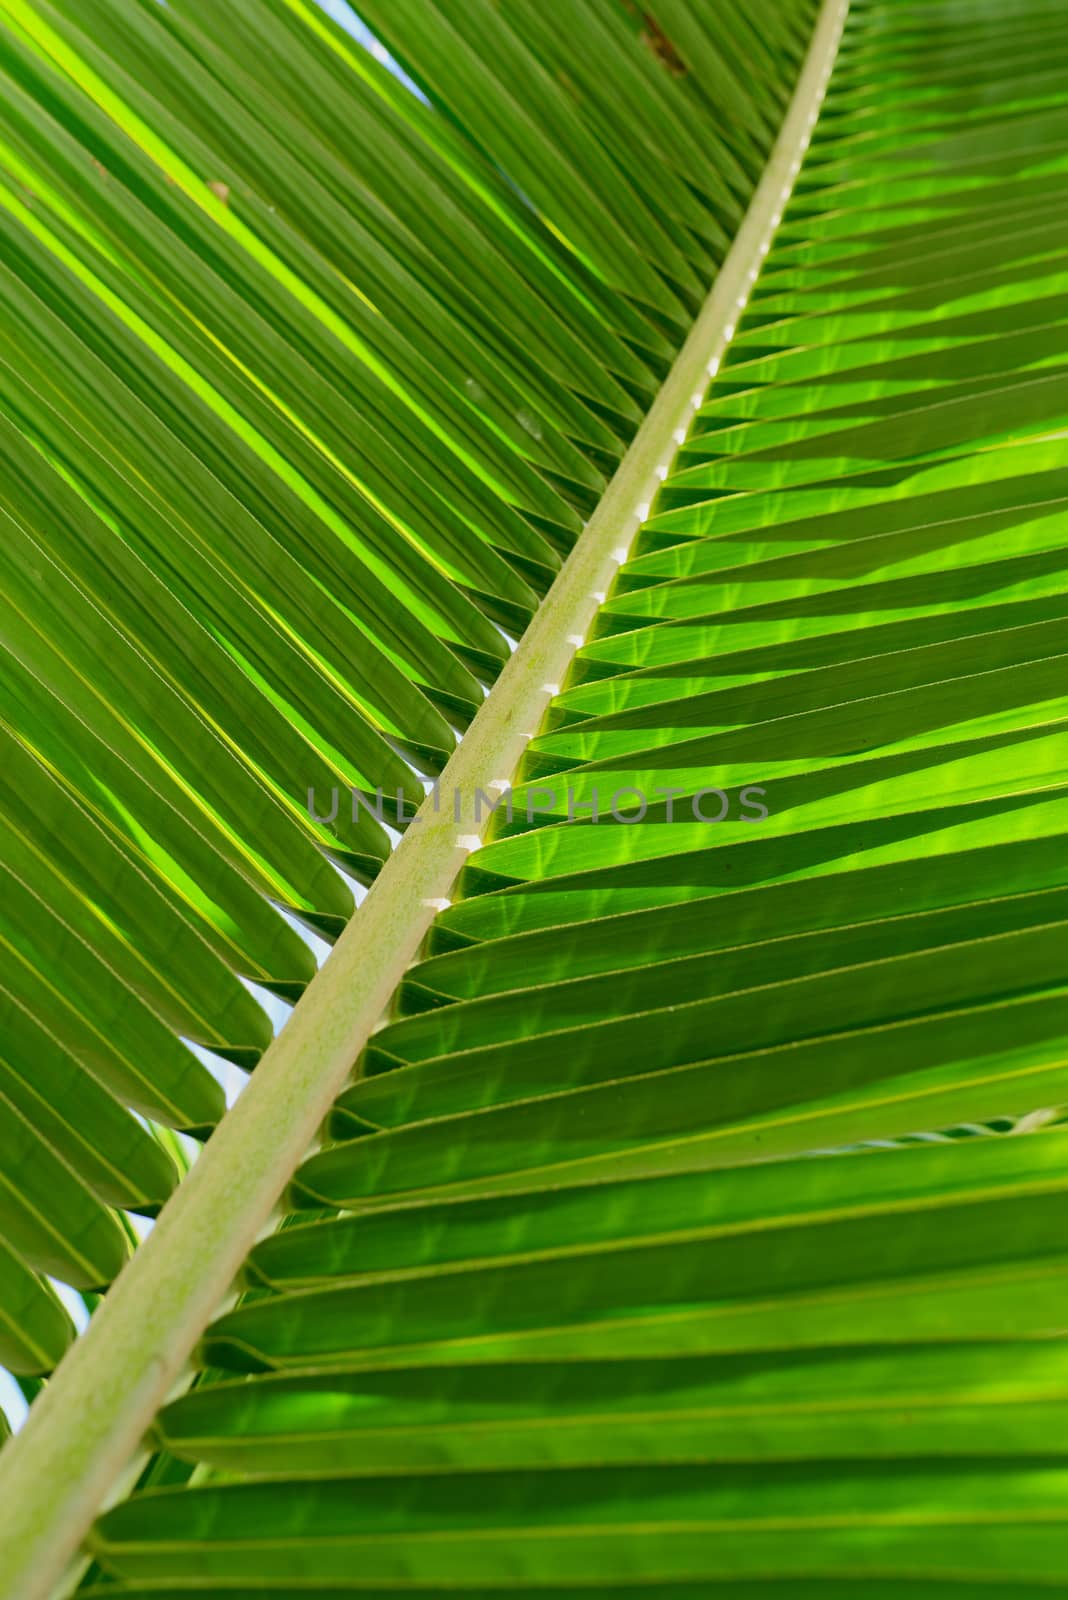 Palm Leaves by antpkr